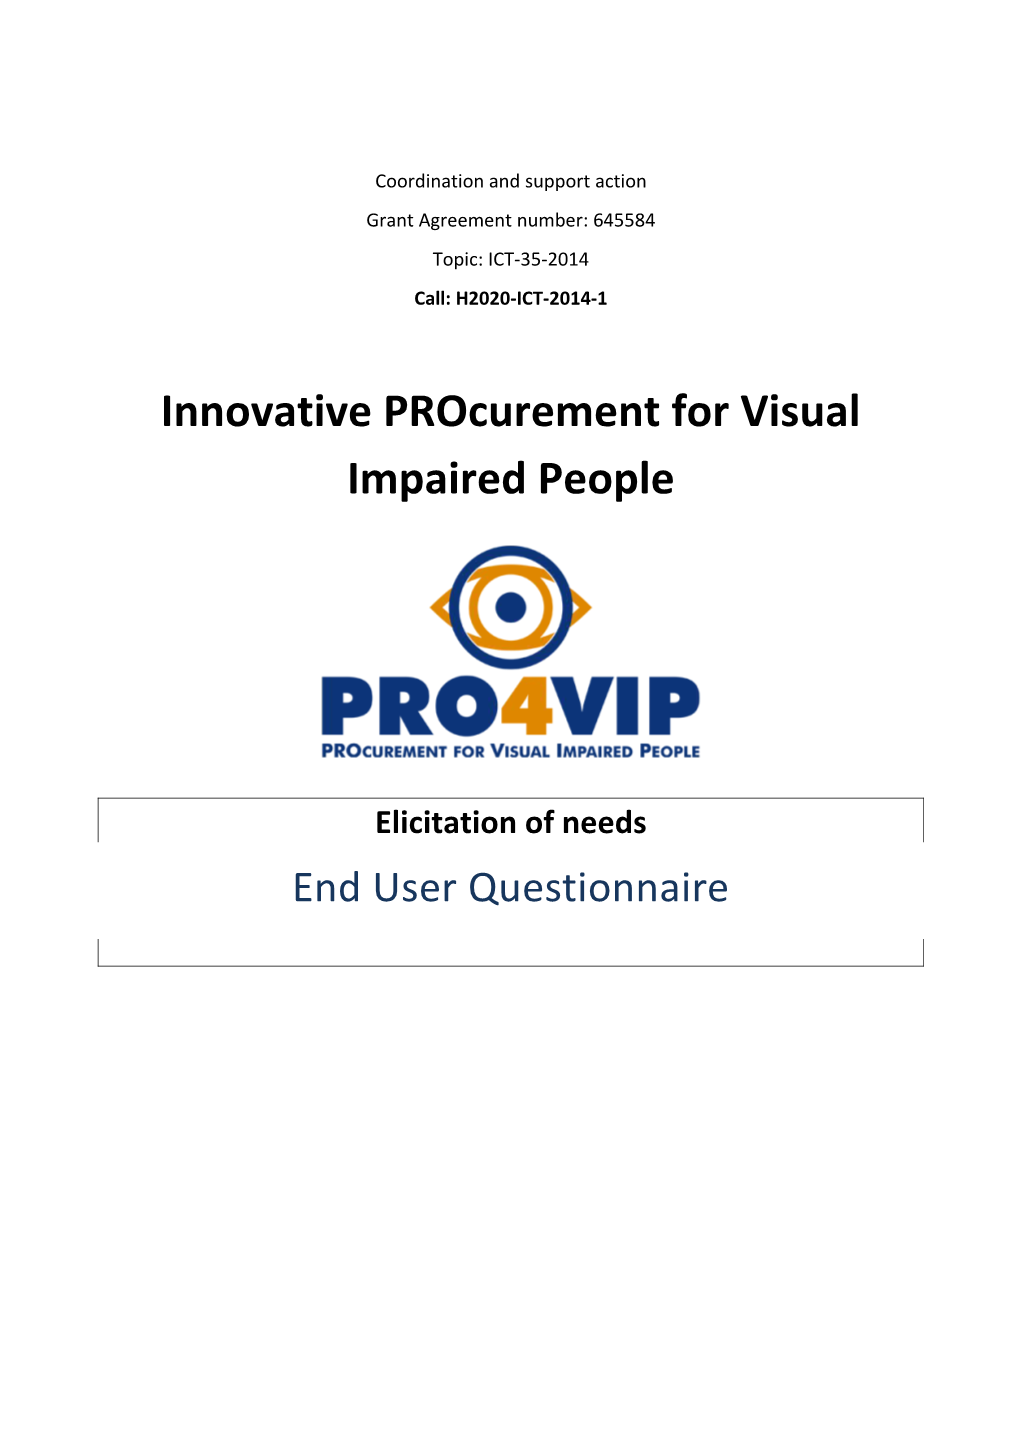 Innovative Procurement for Visual Impaired People